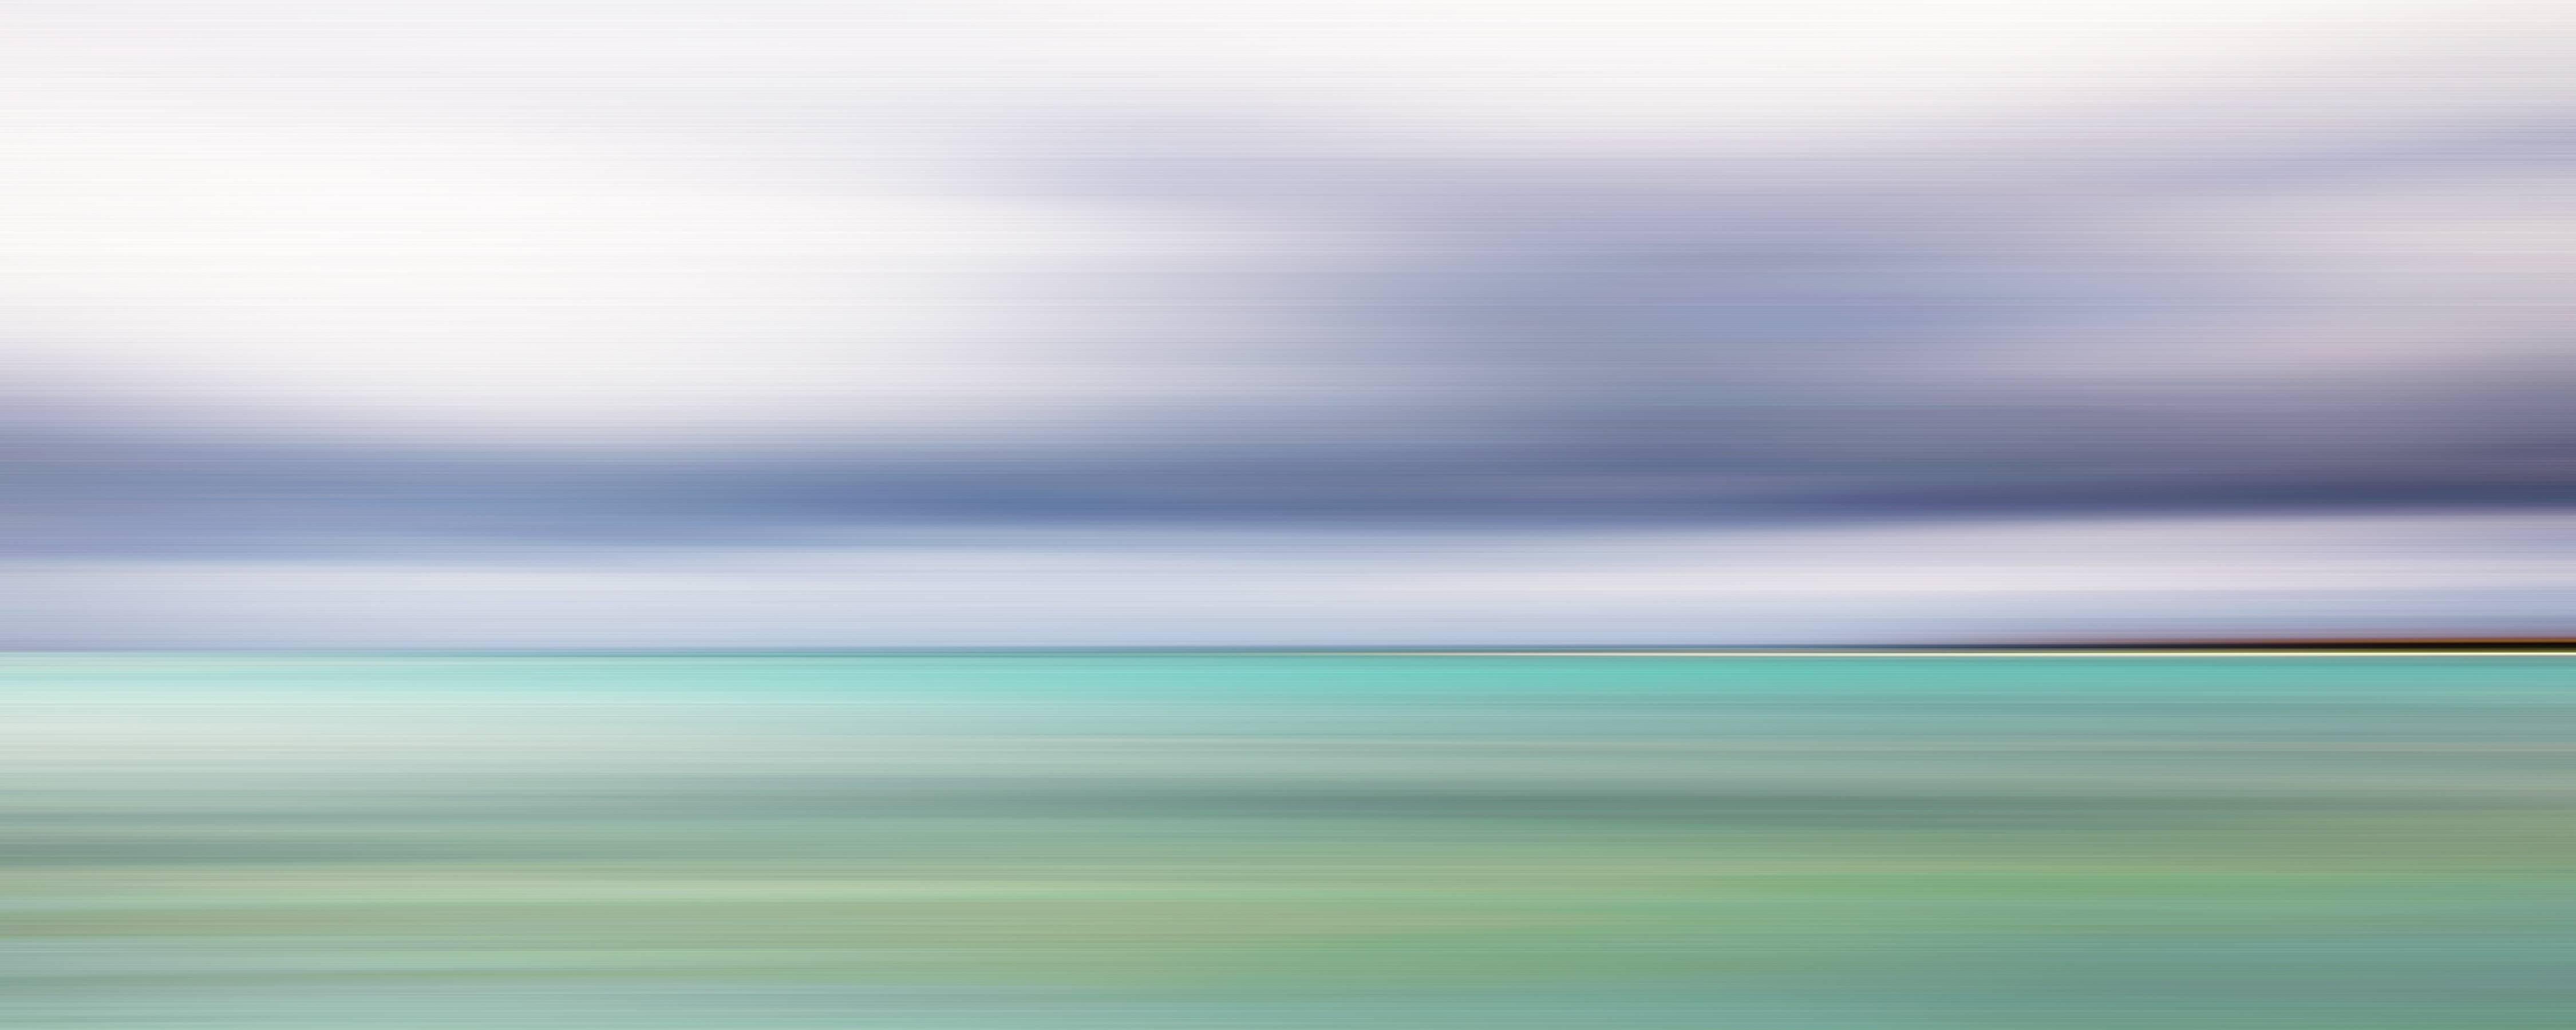 Etienne Labbe Abstract Photograph - Emerald Mood 